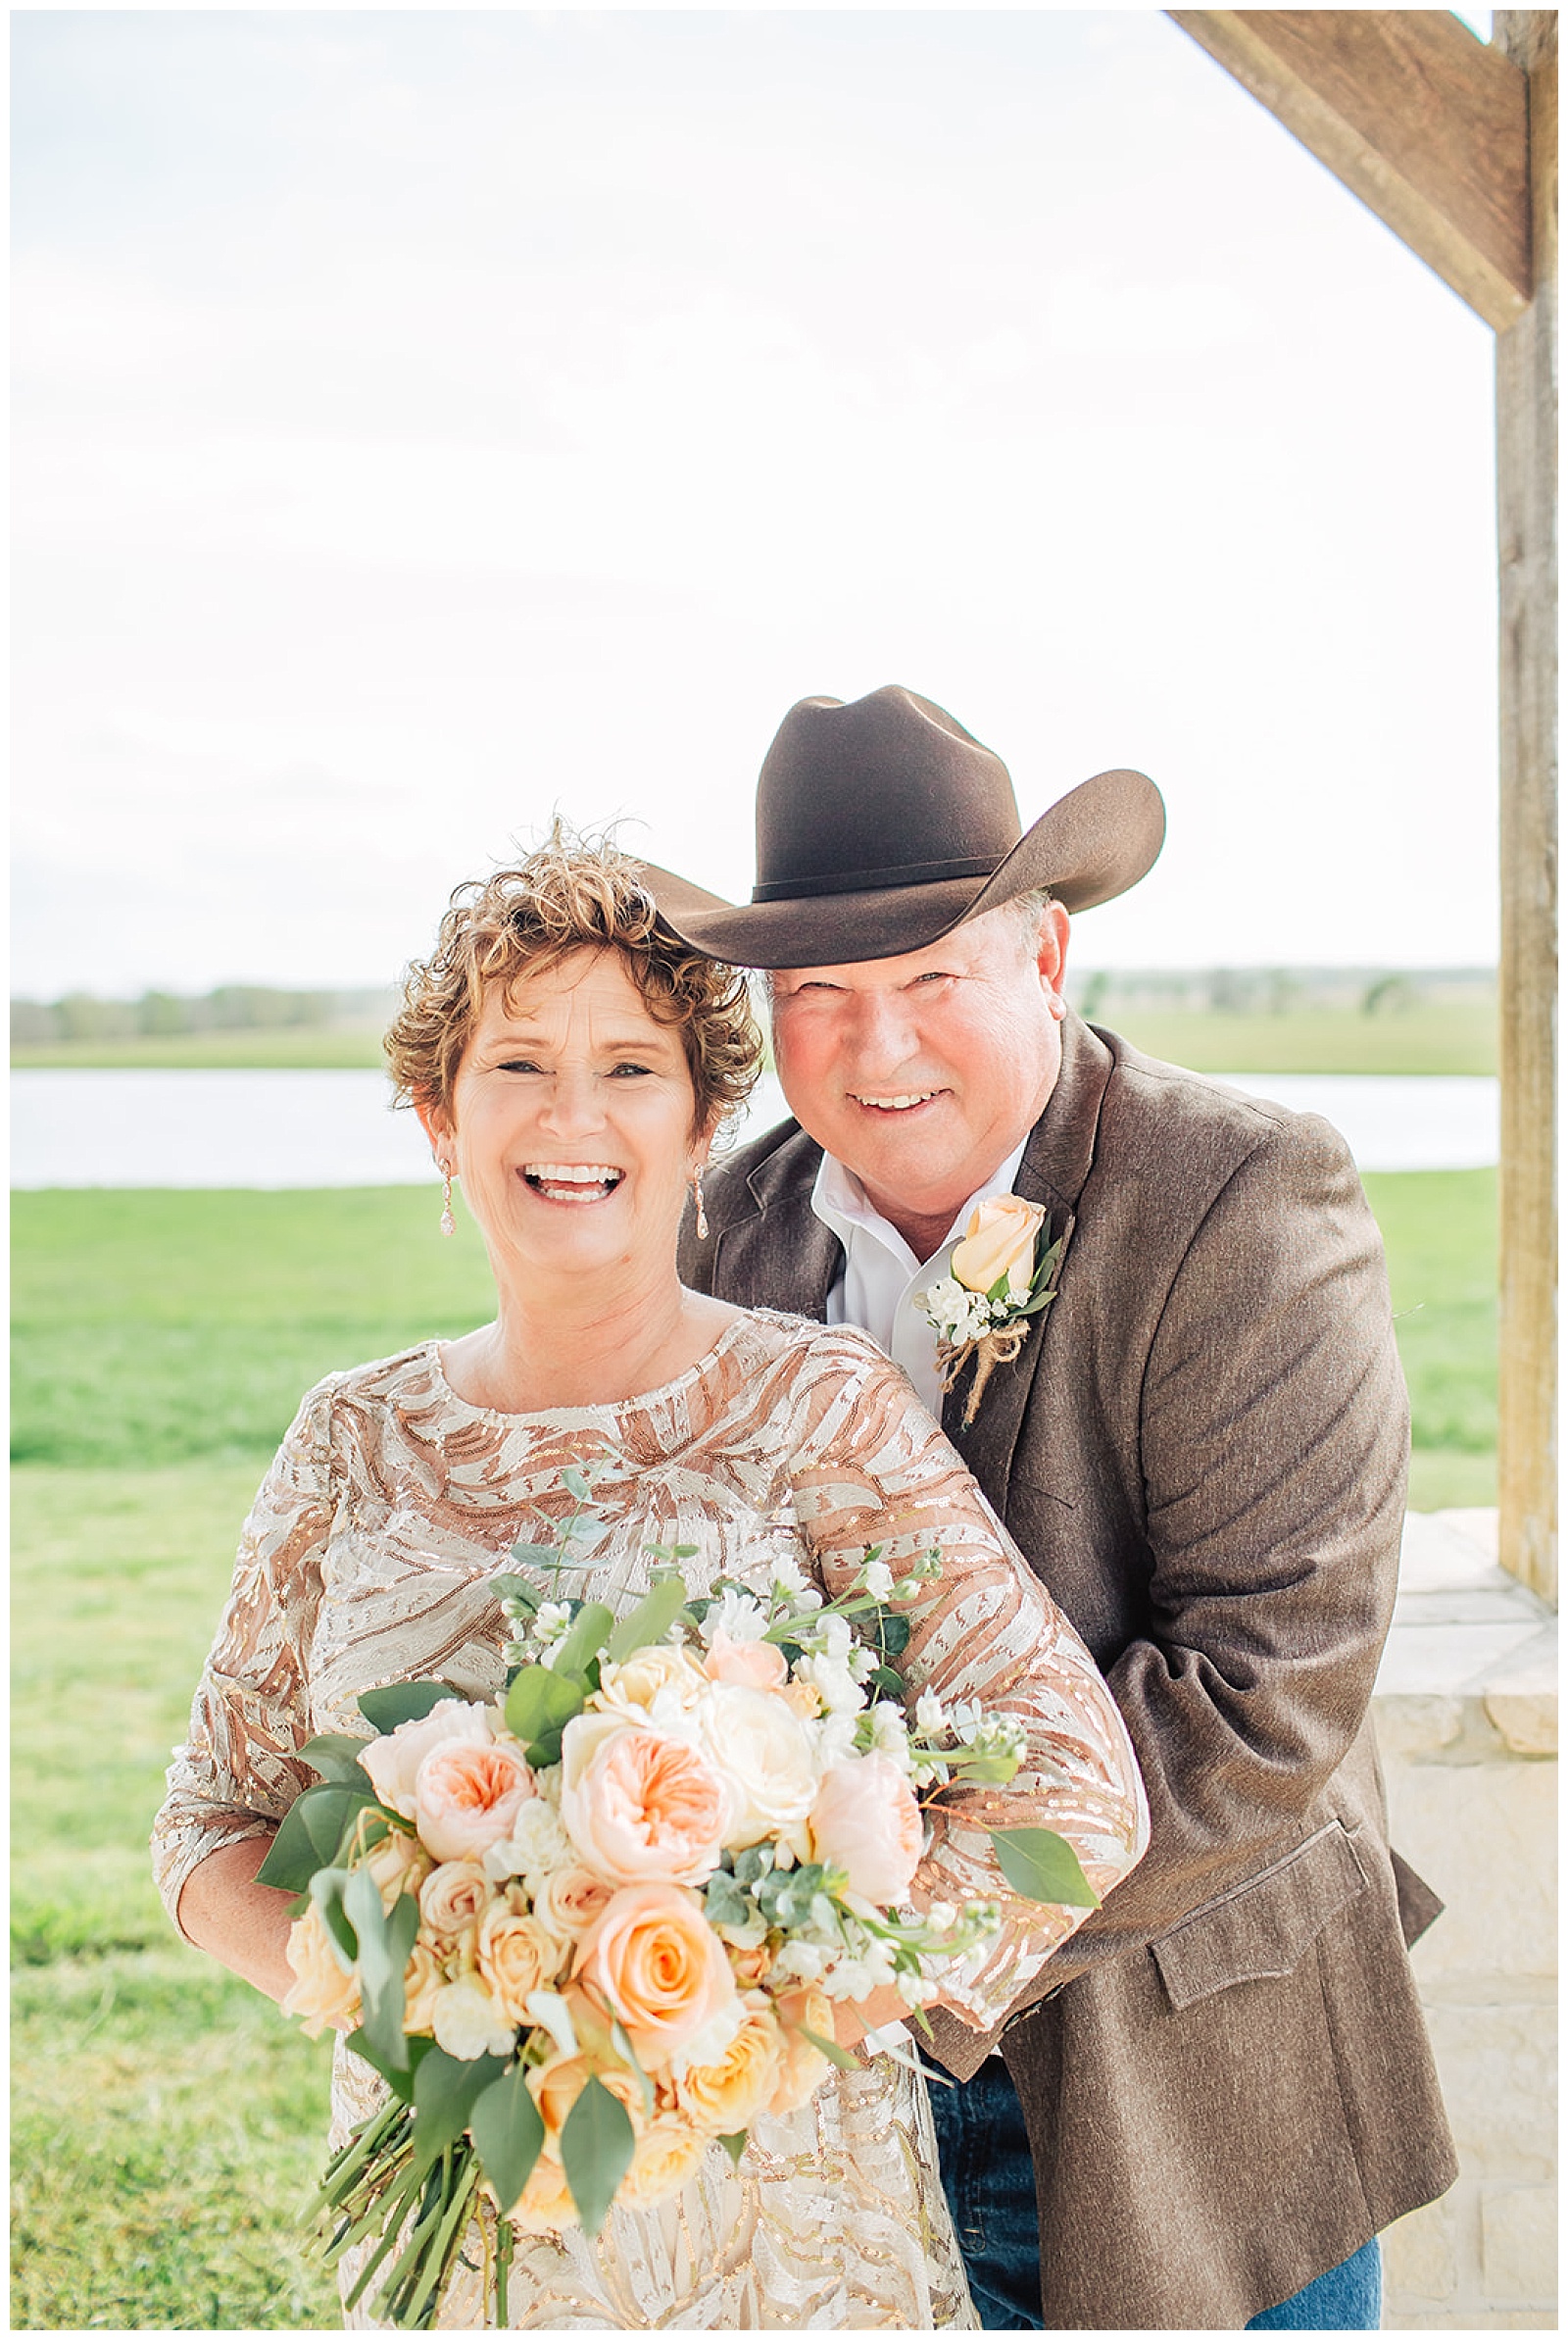 Newly married couple | Organic Peach inspired Indoor Outdoor Ceremony